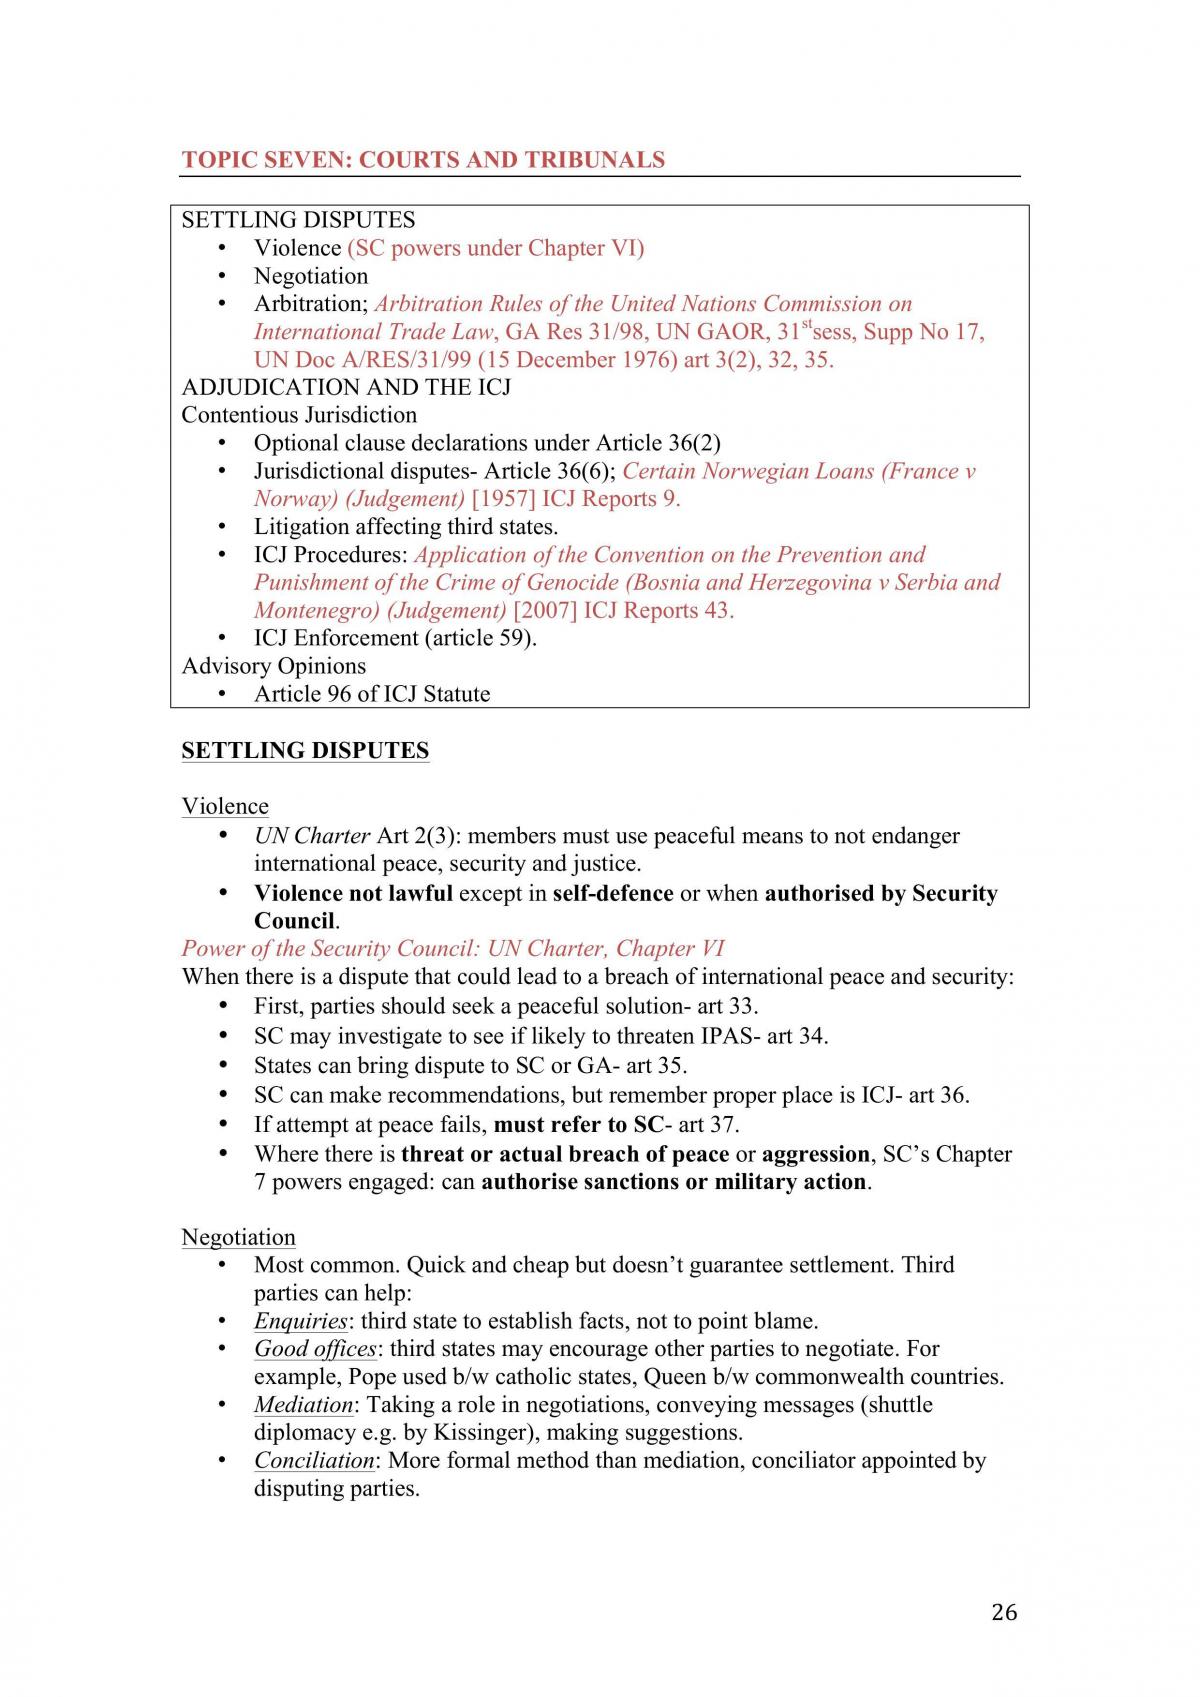 International-Law-Detailed-Yet-Organised-Notes-Distinction-Grade-of-80-Achieved - Page 26